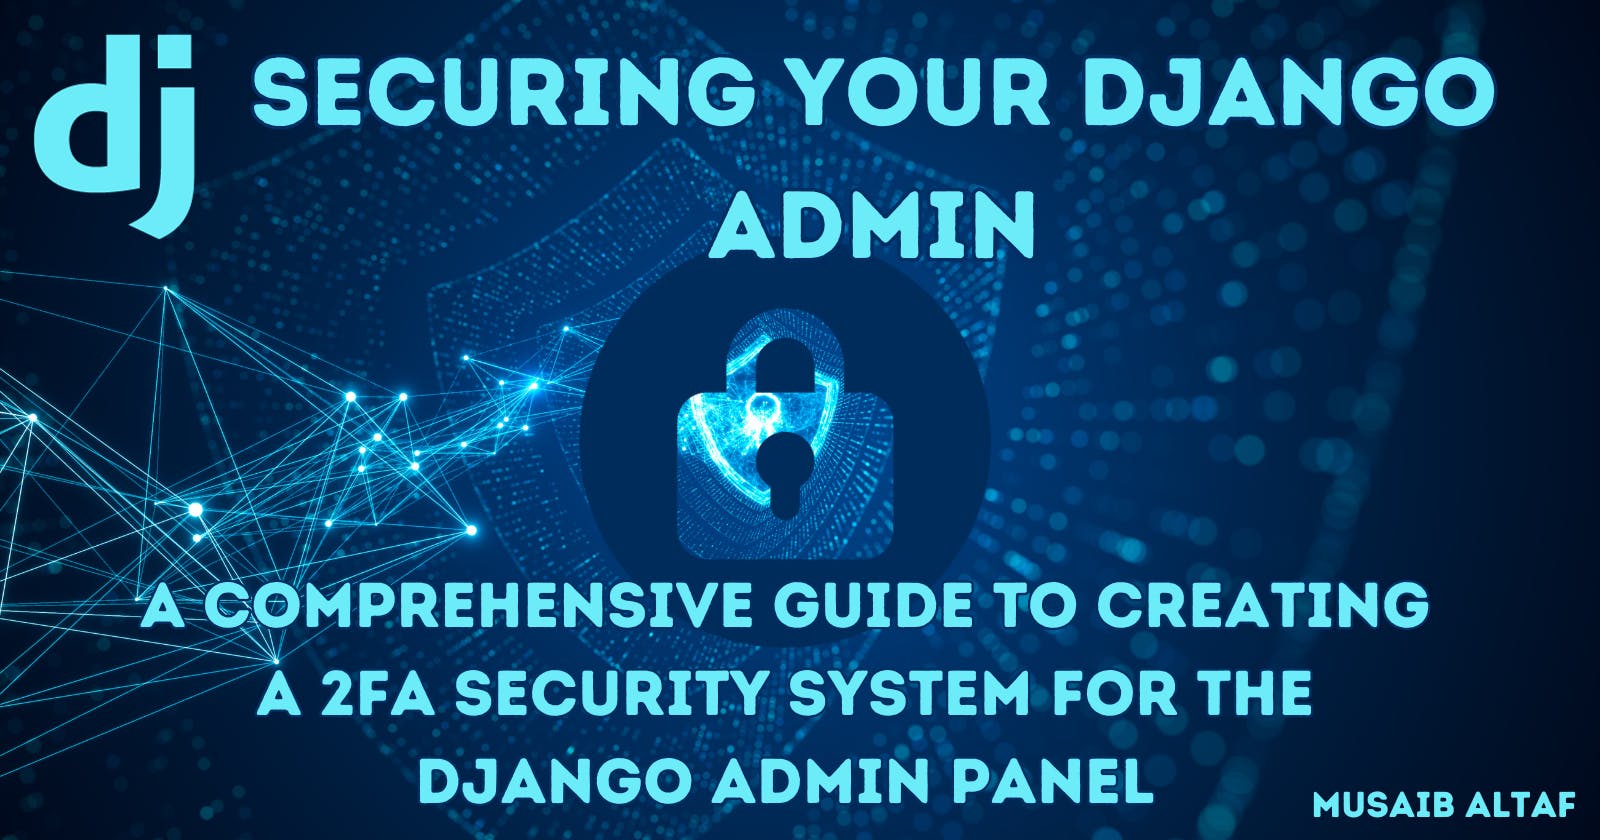 Securing Your Django Admin: A Comprehensive Guide to Creating a 2FA Security System for the Django Admin Panel